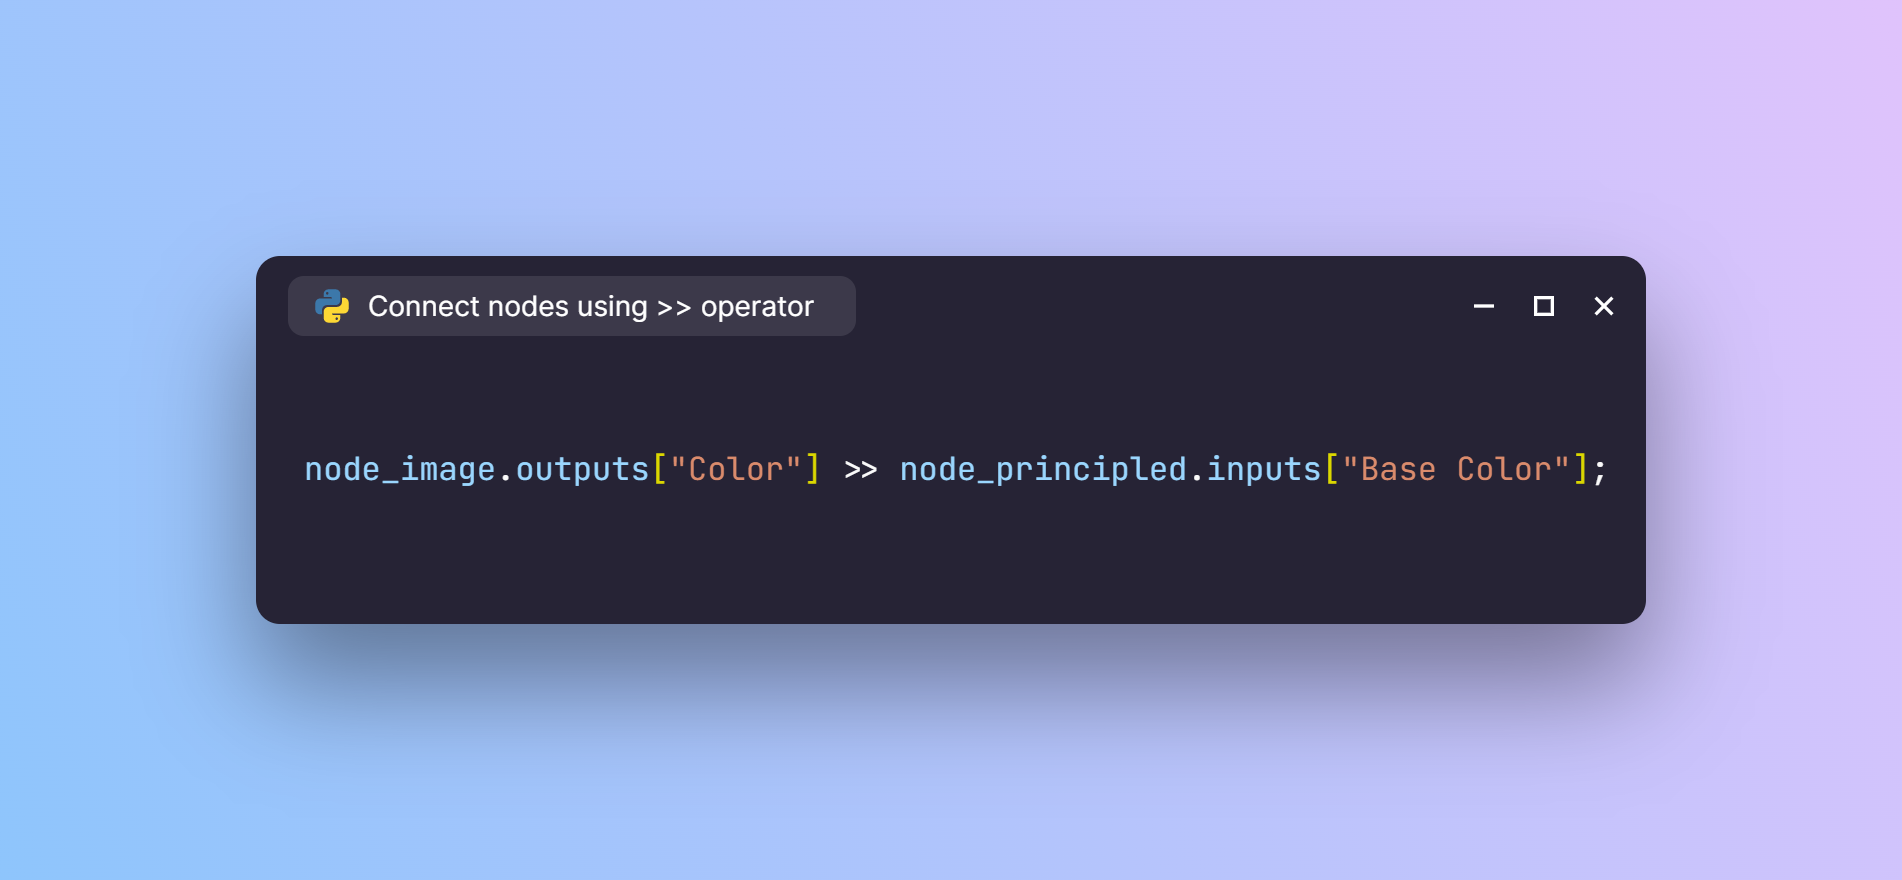 Connect nodes using >> operator